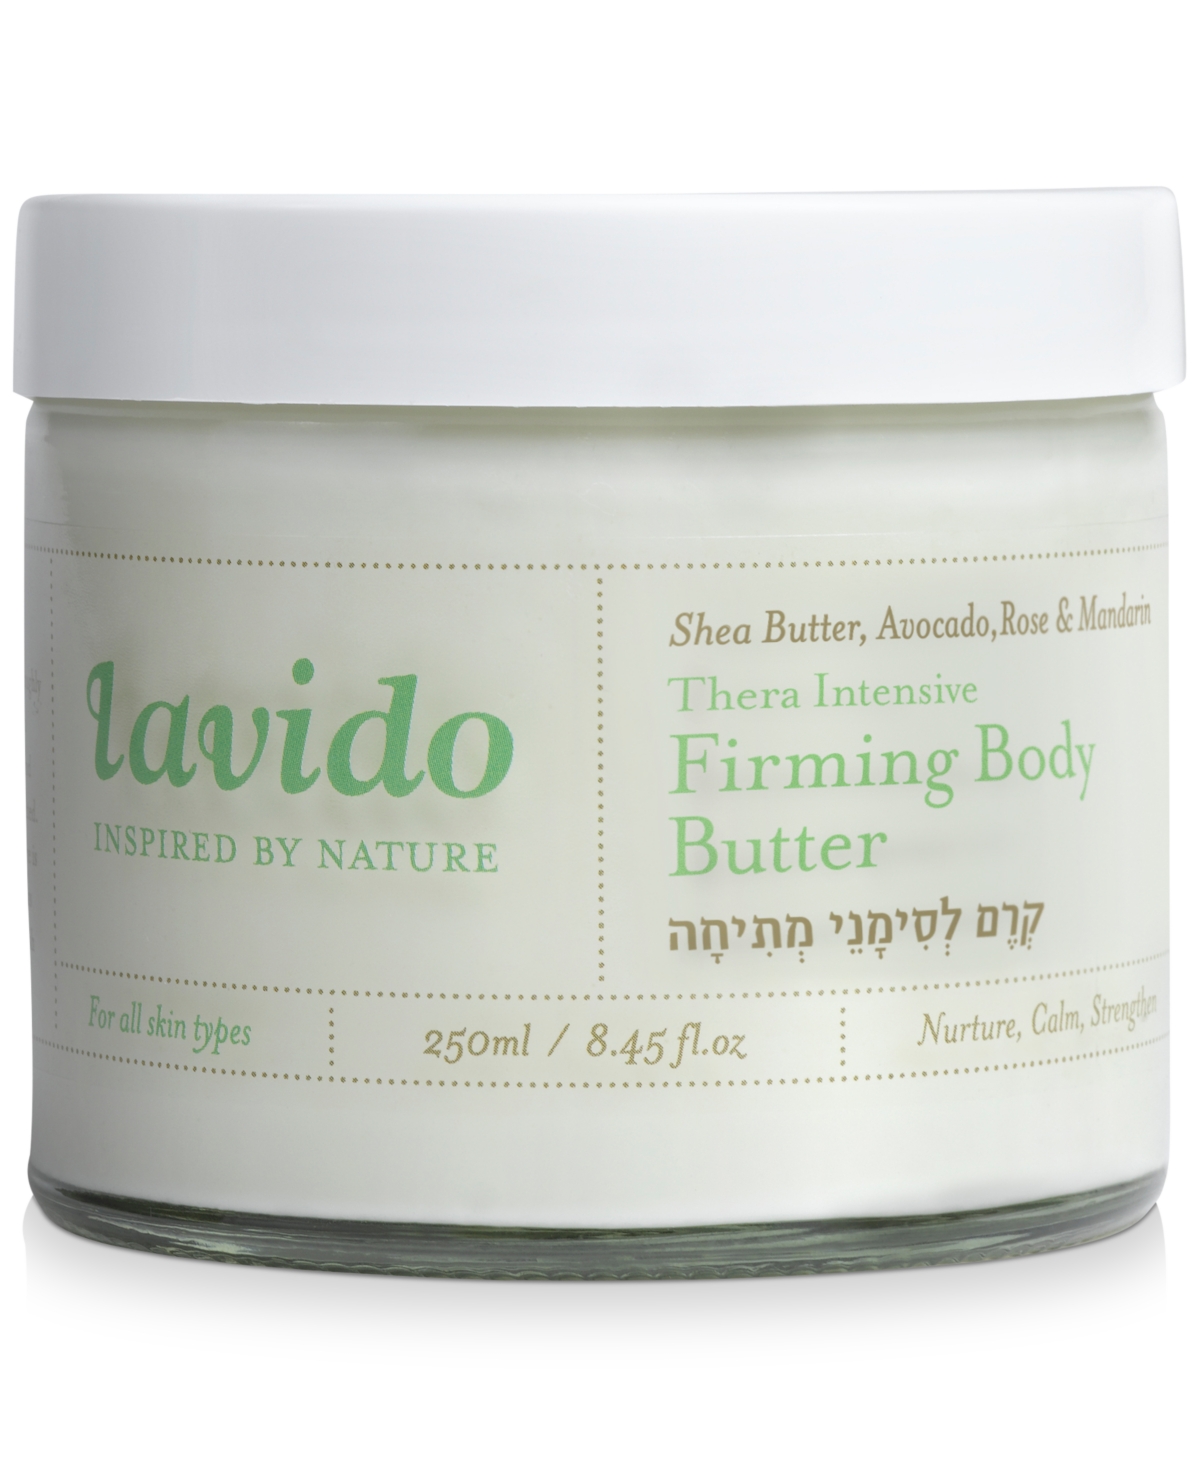 Lavido Thera Intensive Firming Body Butter